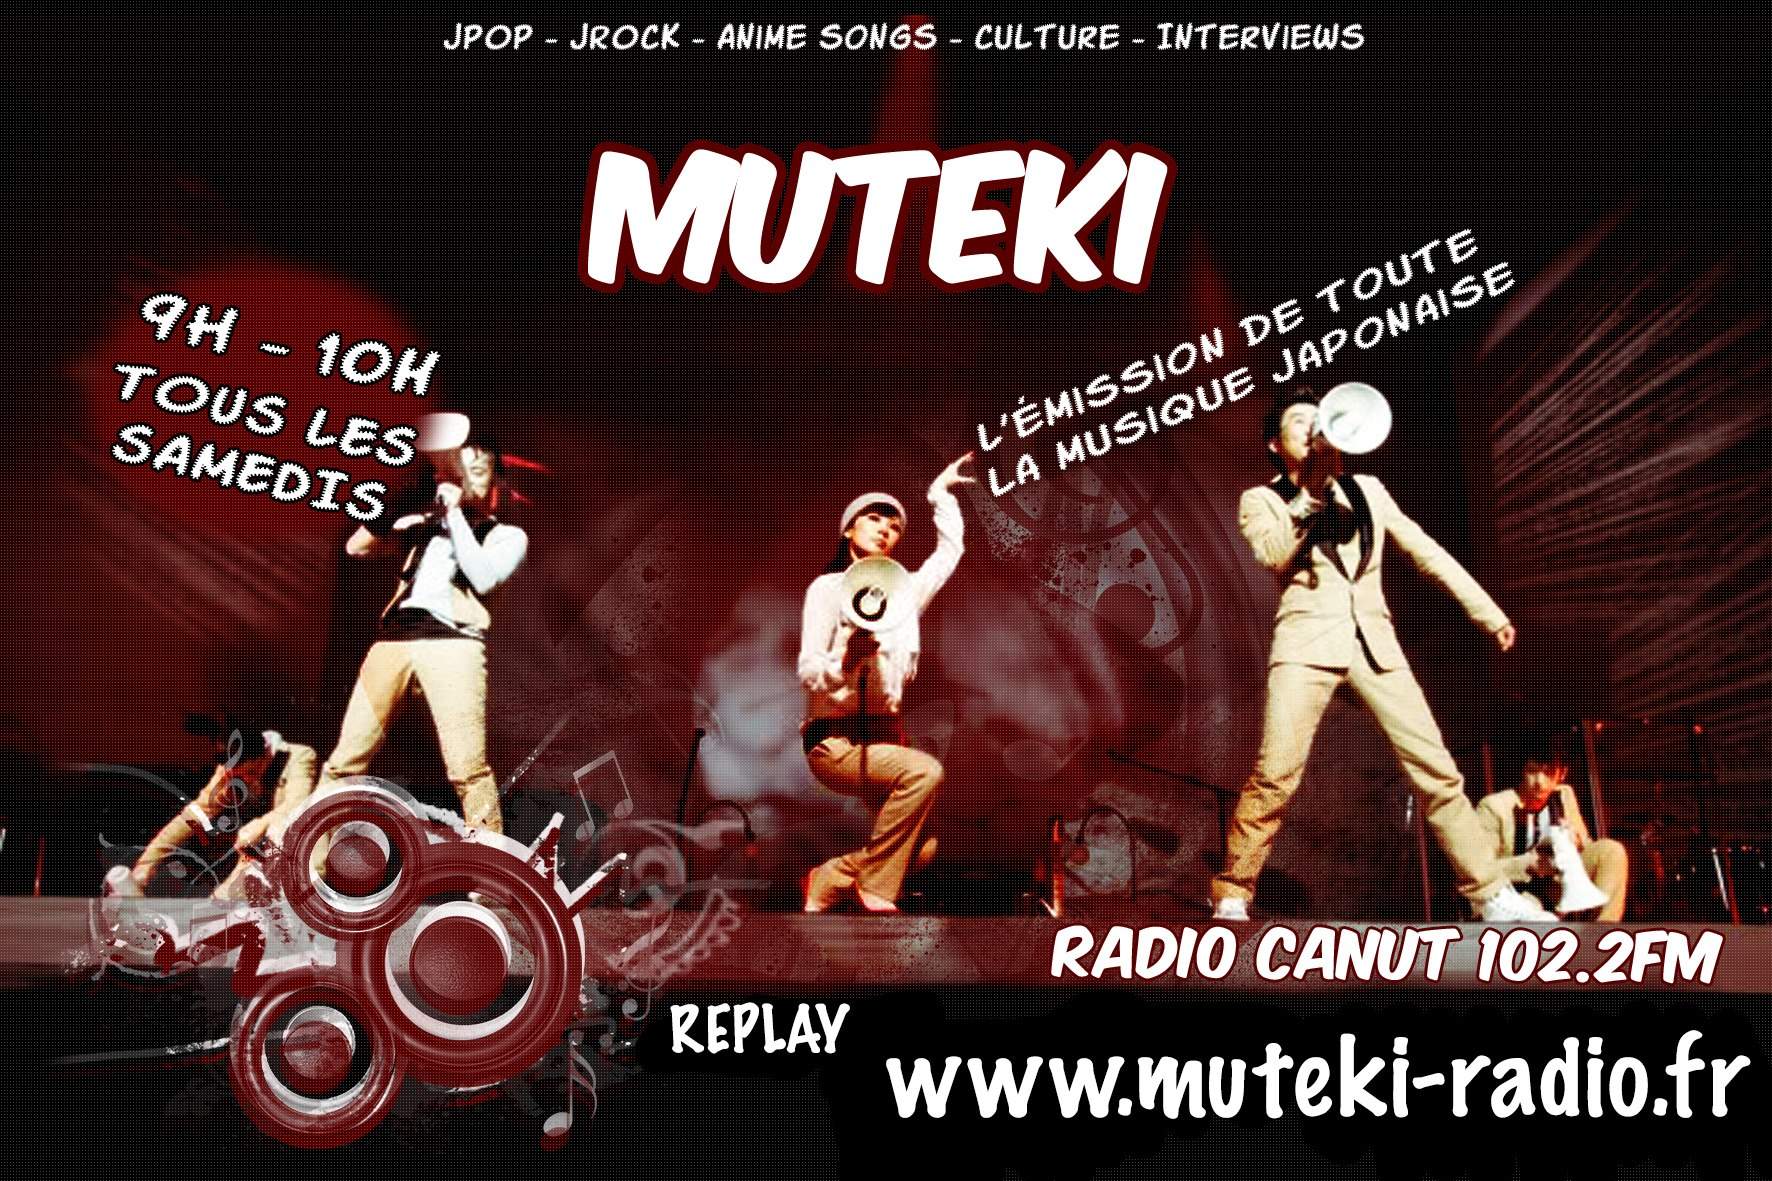 The Muteki show welcomes Pascal Bagot for the tattoo writer.